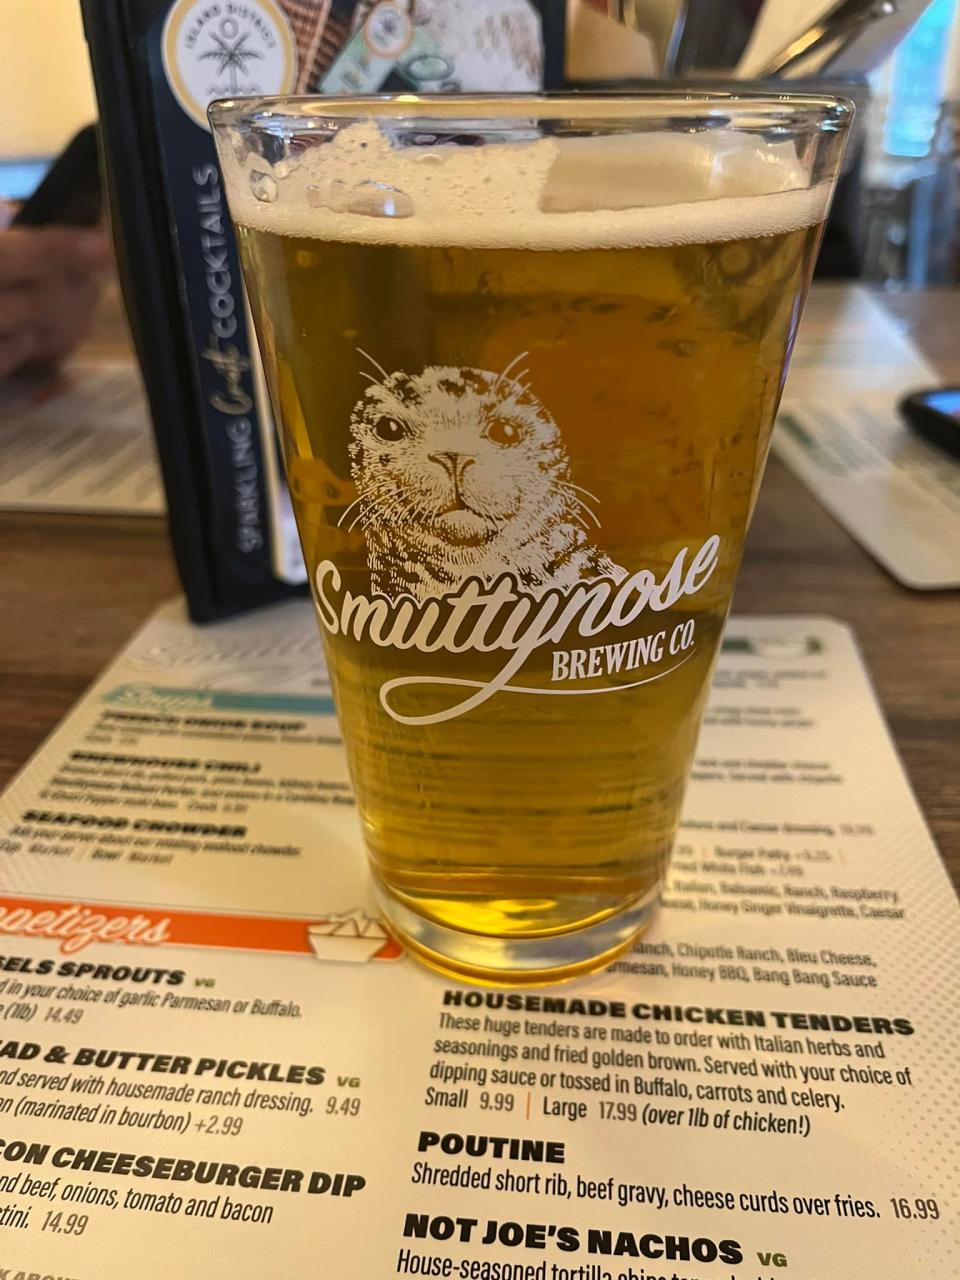 Hampton’s Smuttynose Brewing Co. is the new owner of Wachusett Brewing in Massachusetts